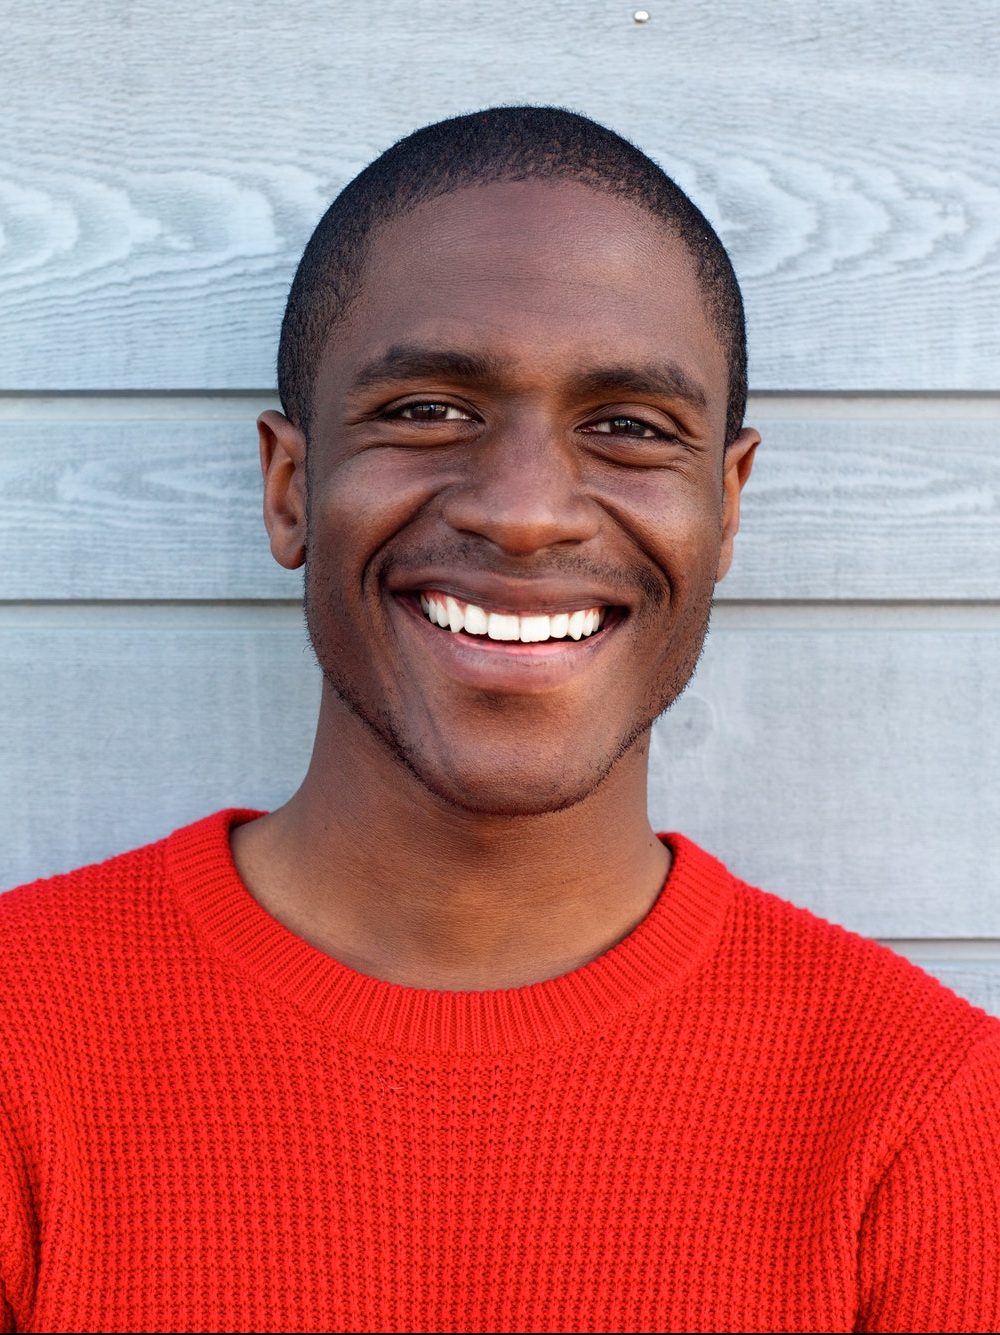 close-up-smiling-young-black-guy-in-red-sweater-e1637383598973.jpg